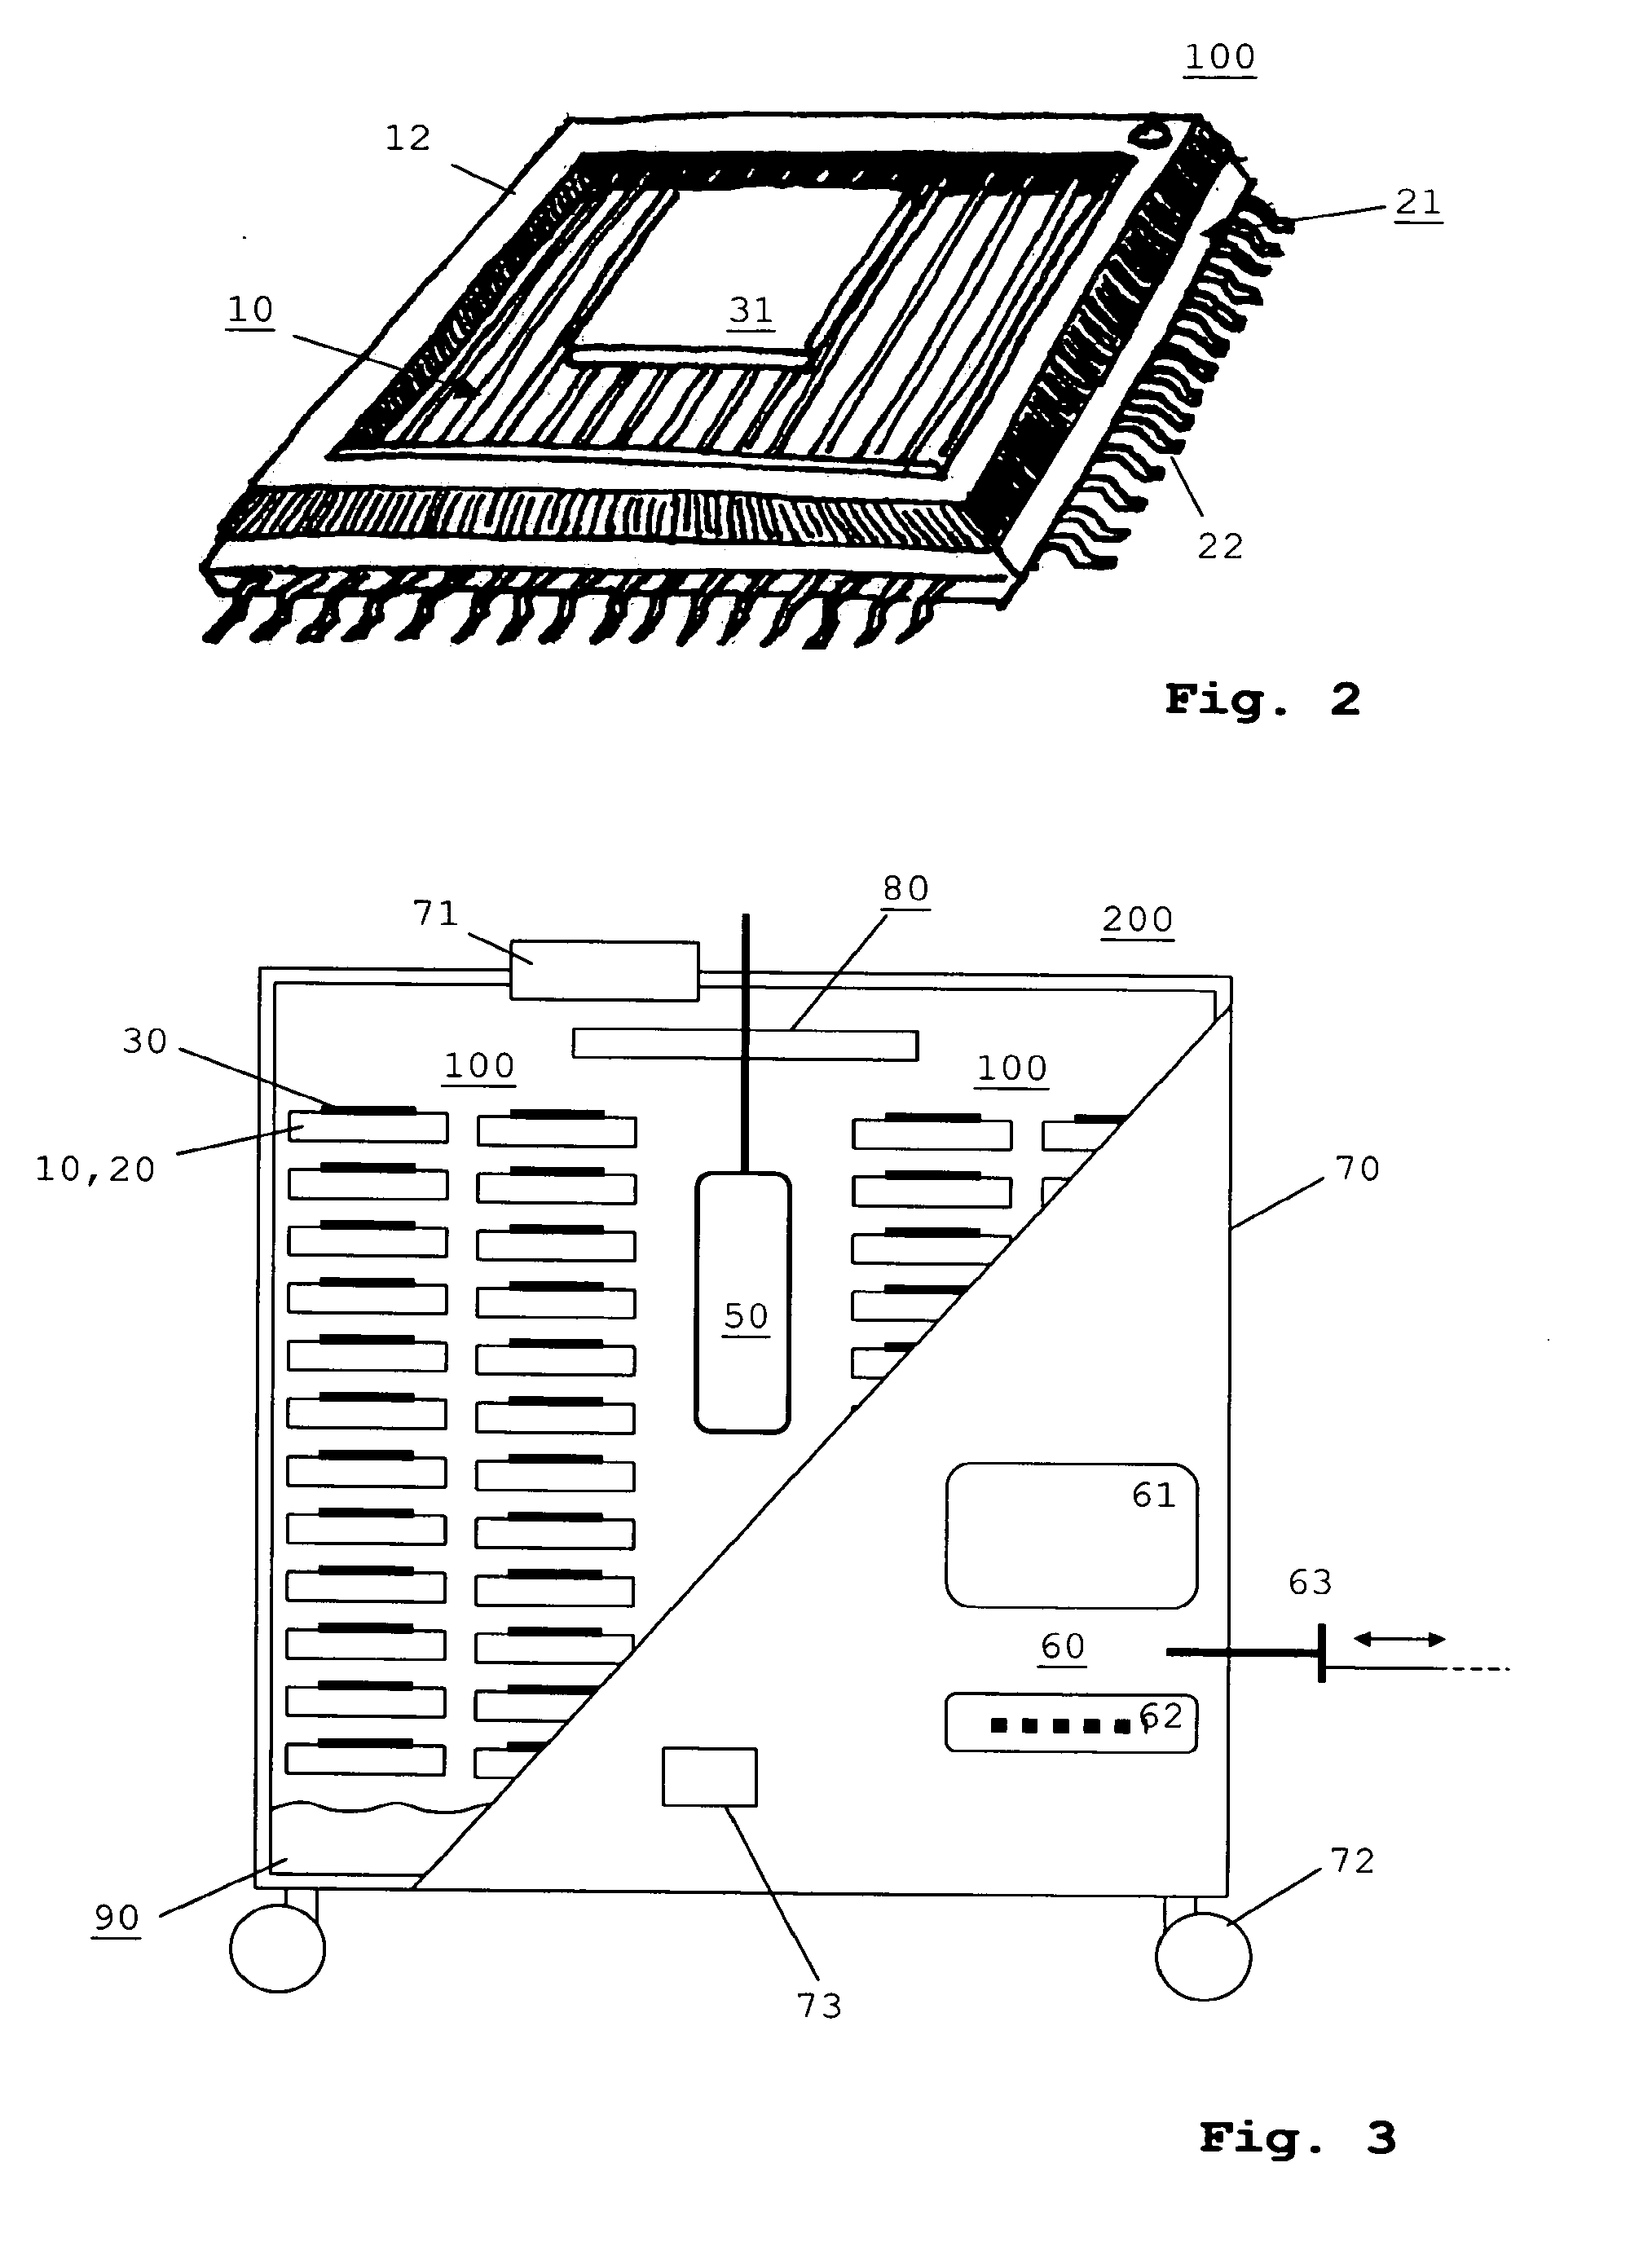 Cryogenic storage device comprising a transponder